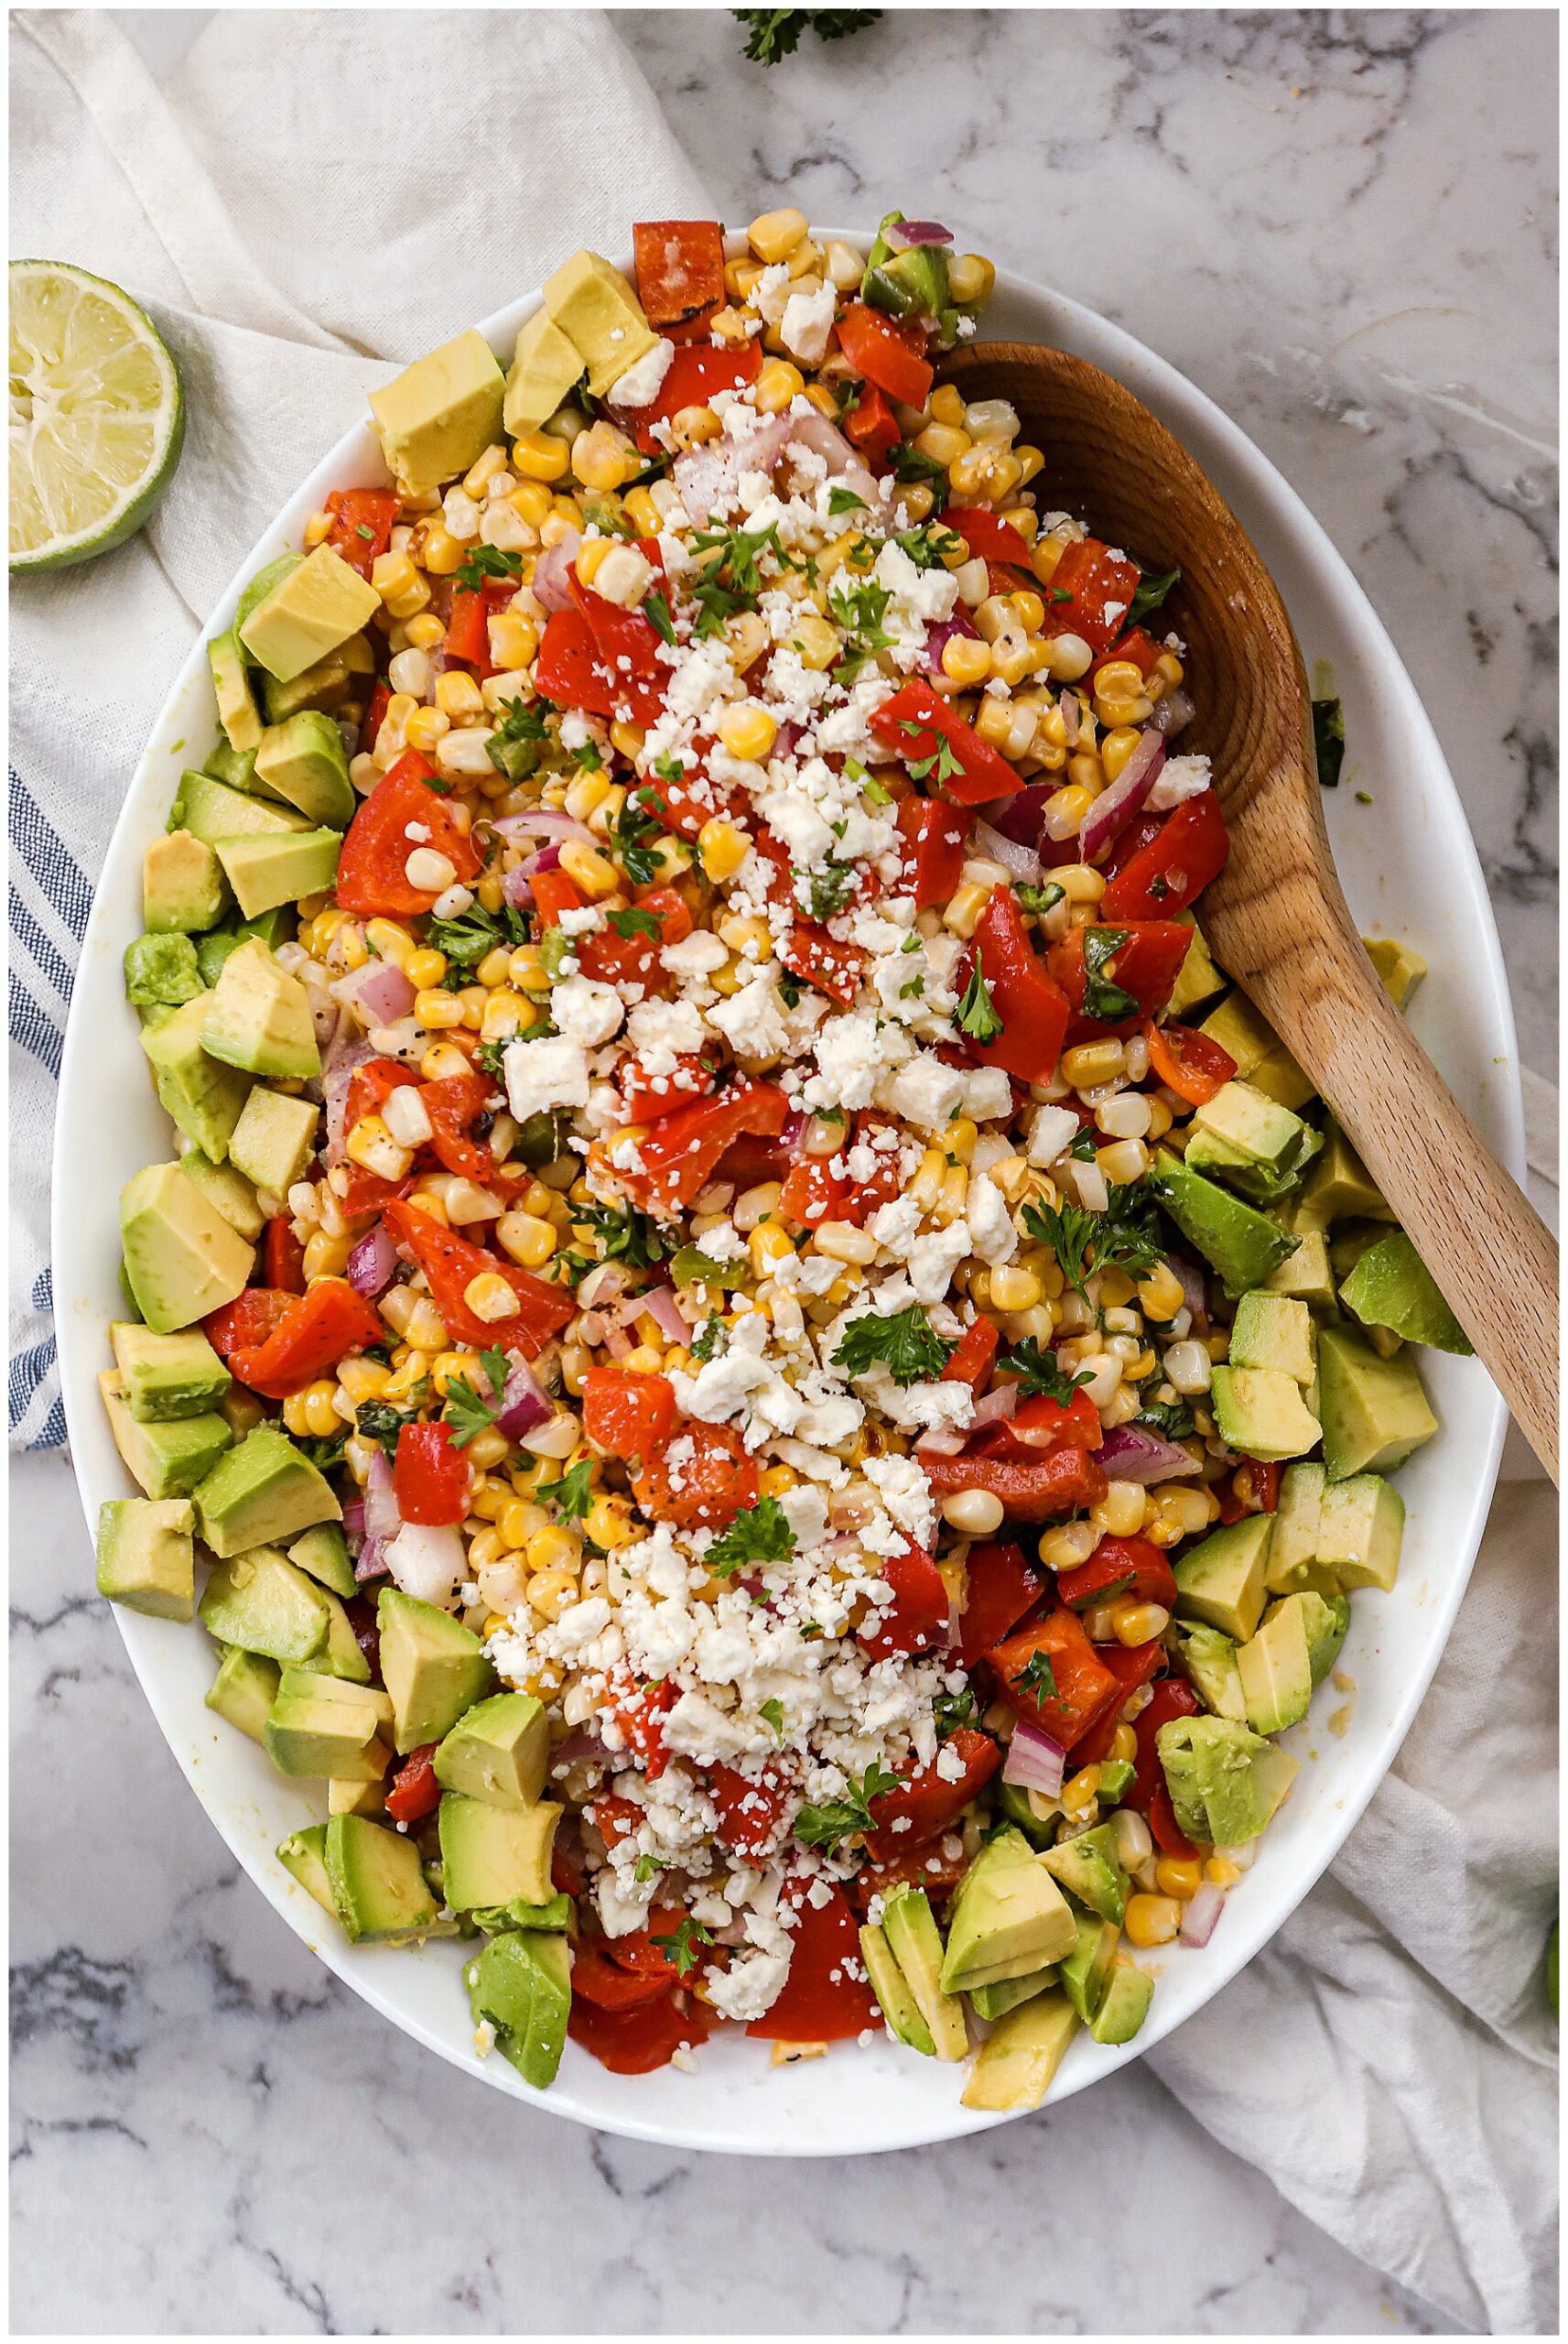 Recipe for Grilled Corn Salad with red peppers and avocado